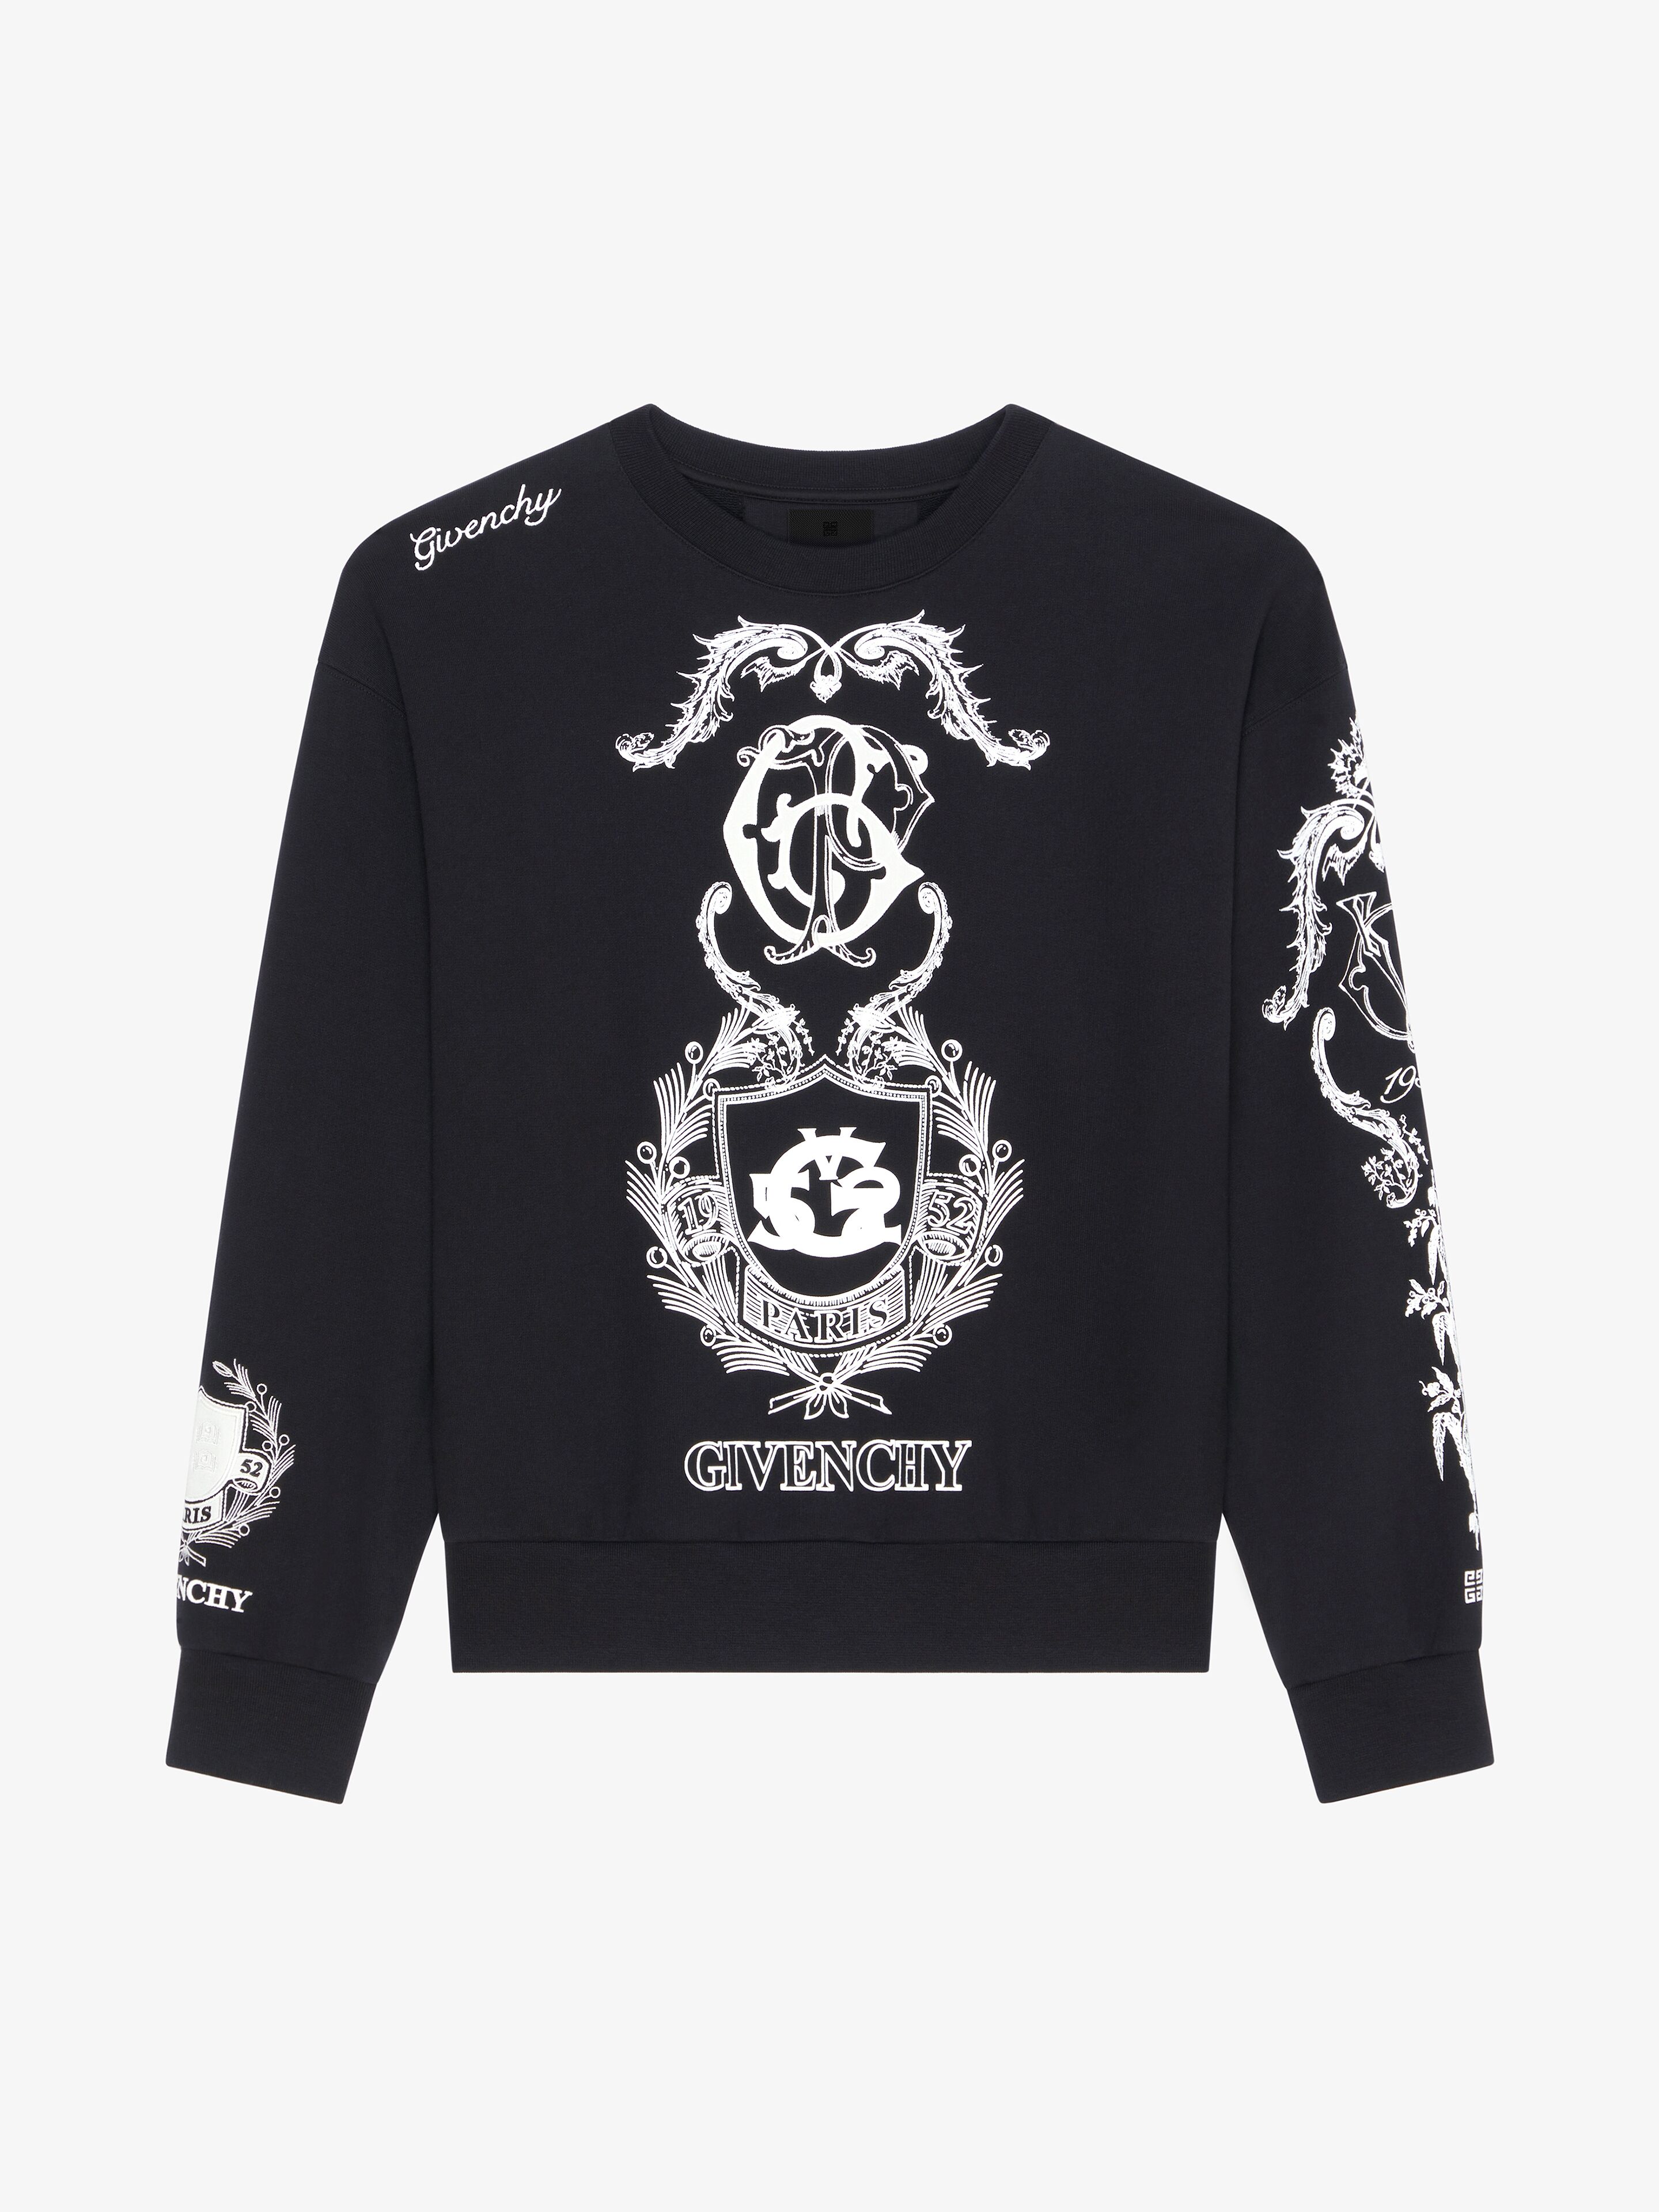 Givenchy official site - Men's collection | Givenchy